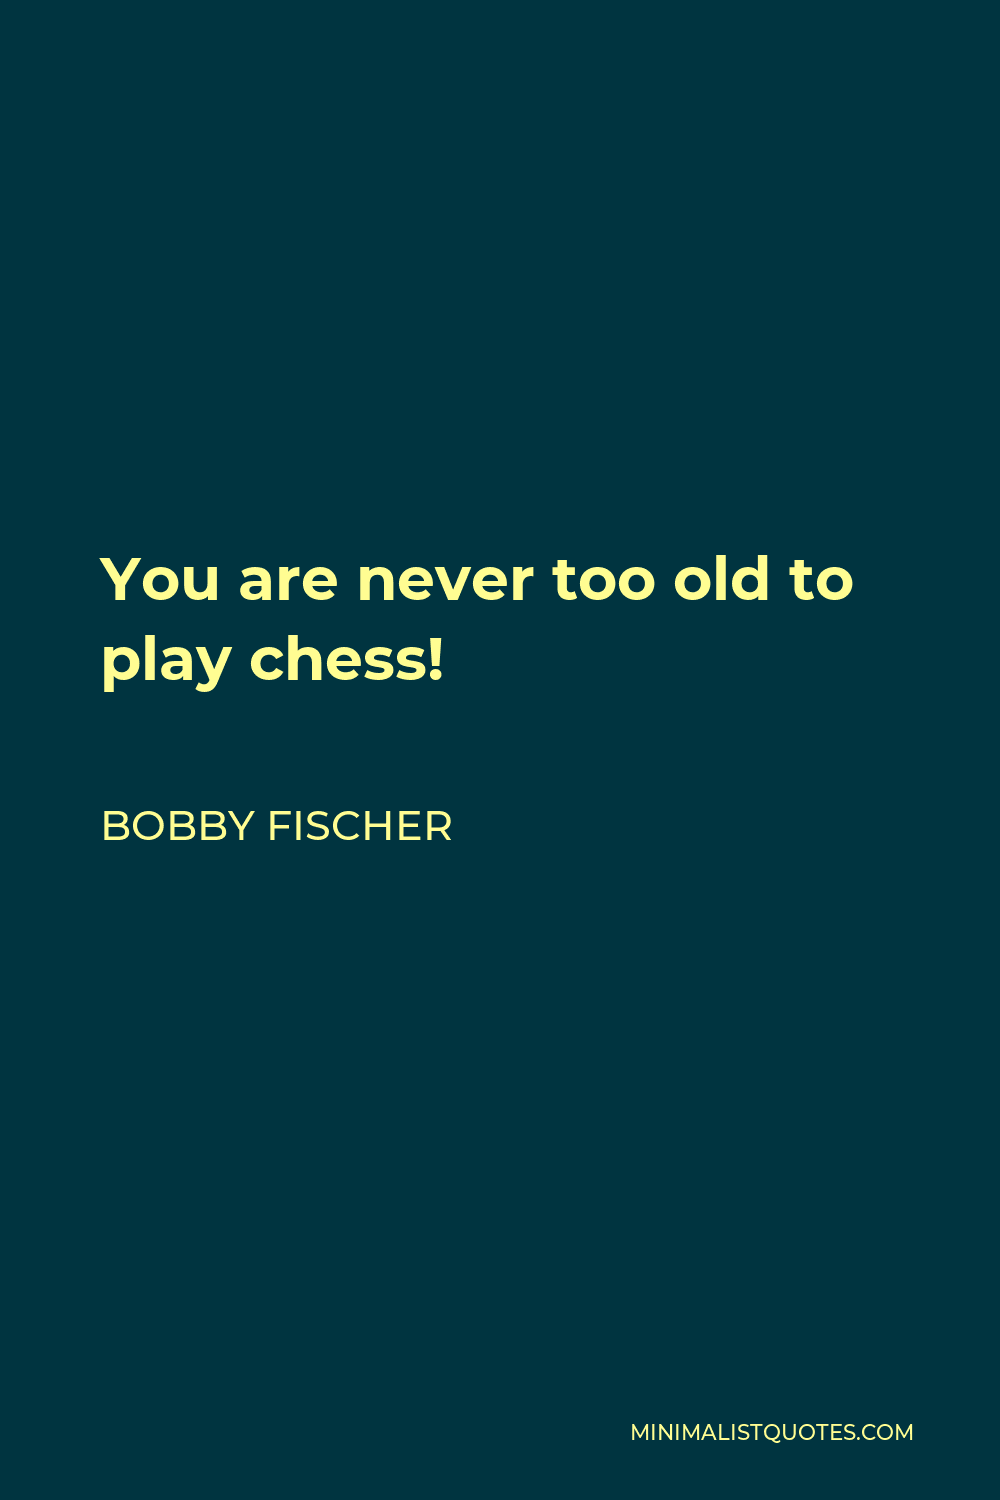 Bobby Fischer quote: You are never too old to play chess!